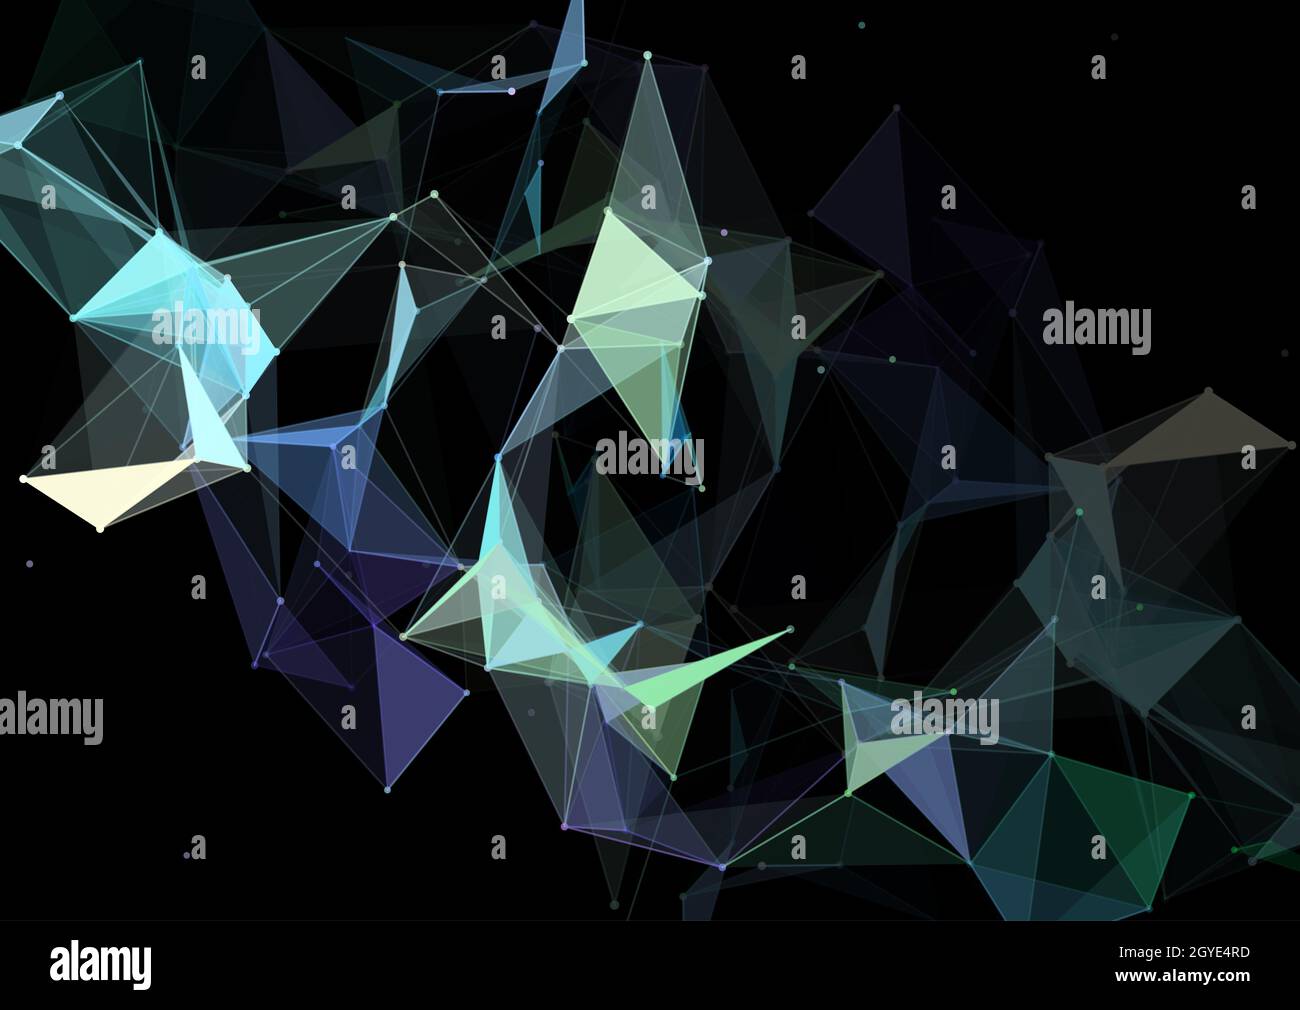 Abstract network connections background with a low poly design Stock Photo